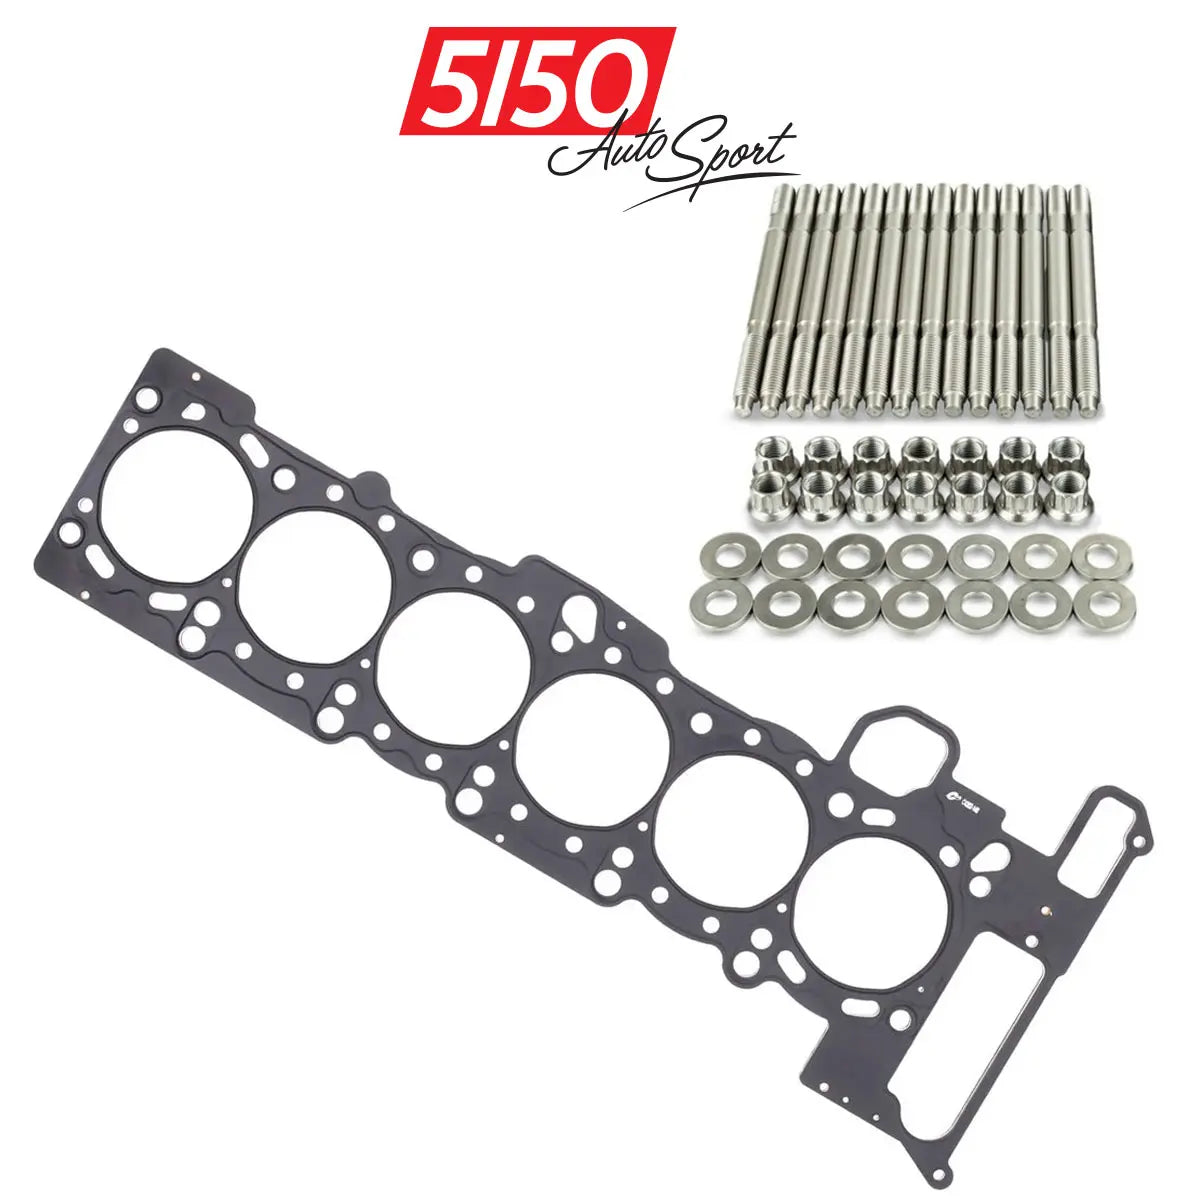 Cometic Multi Layered Steel Head Gasket and Upgraded Head Stud Kit for BMW M52TU M54 Engines